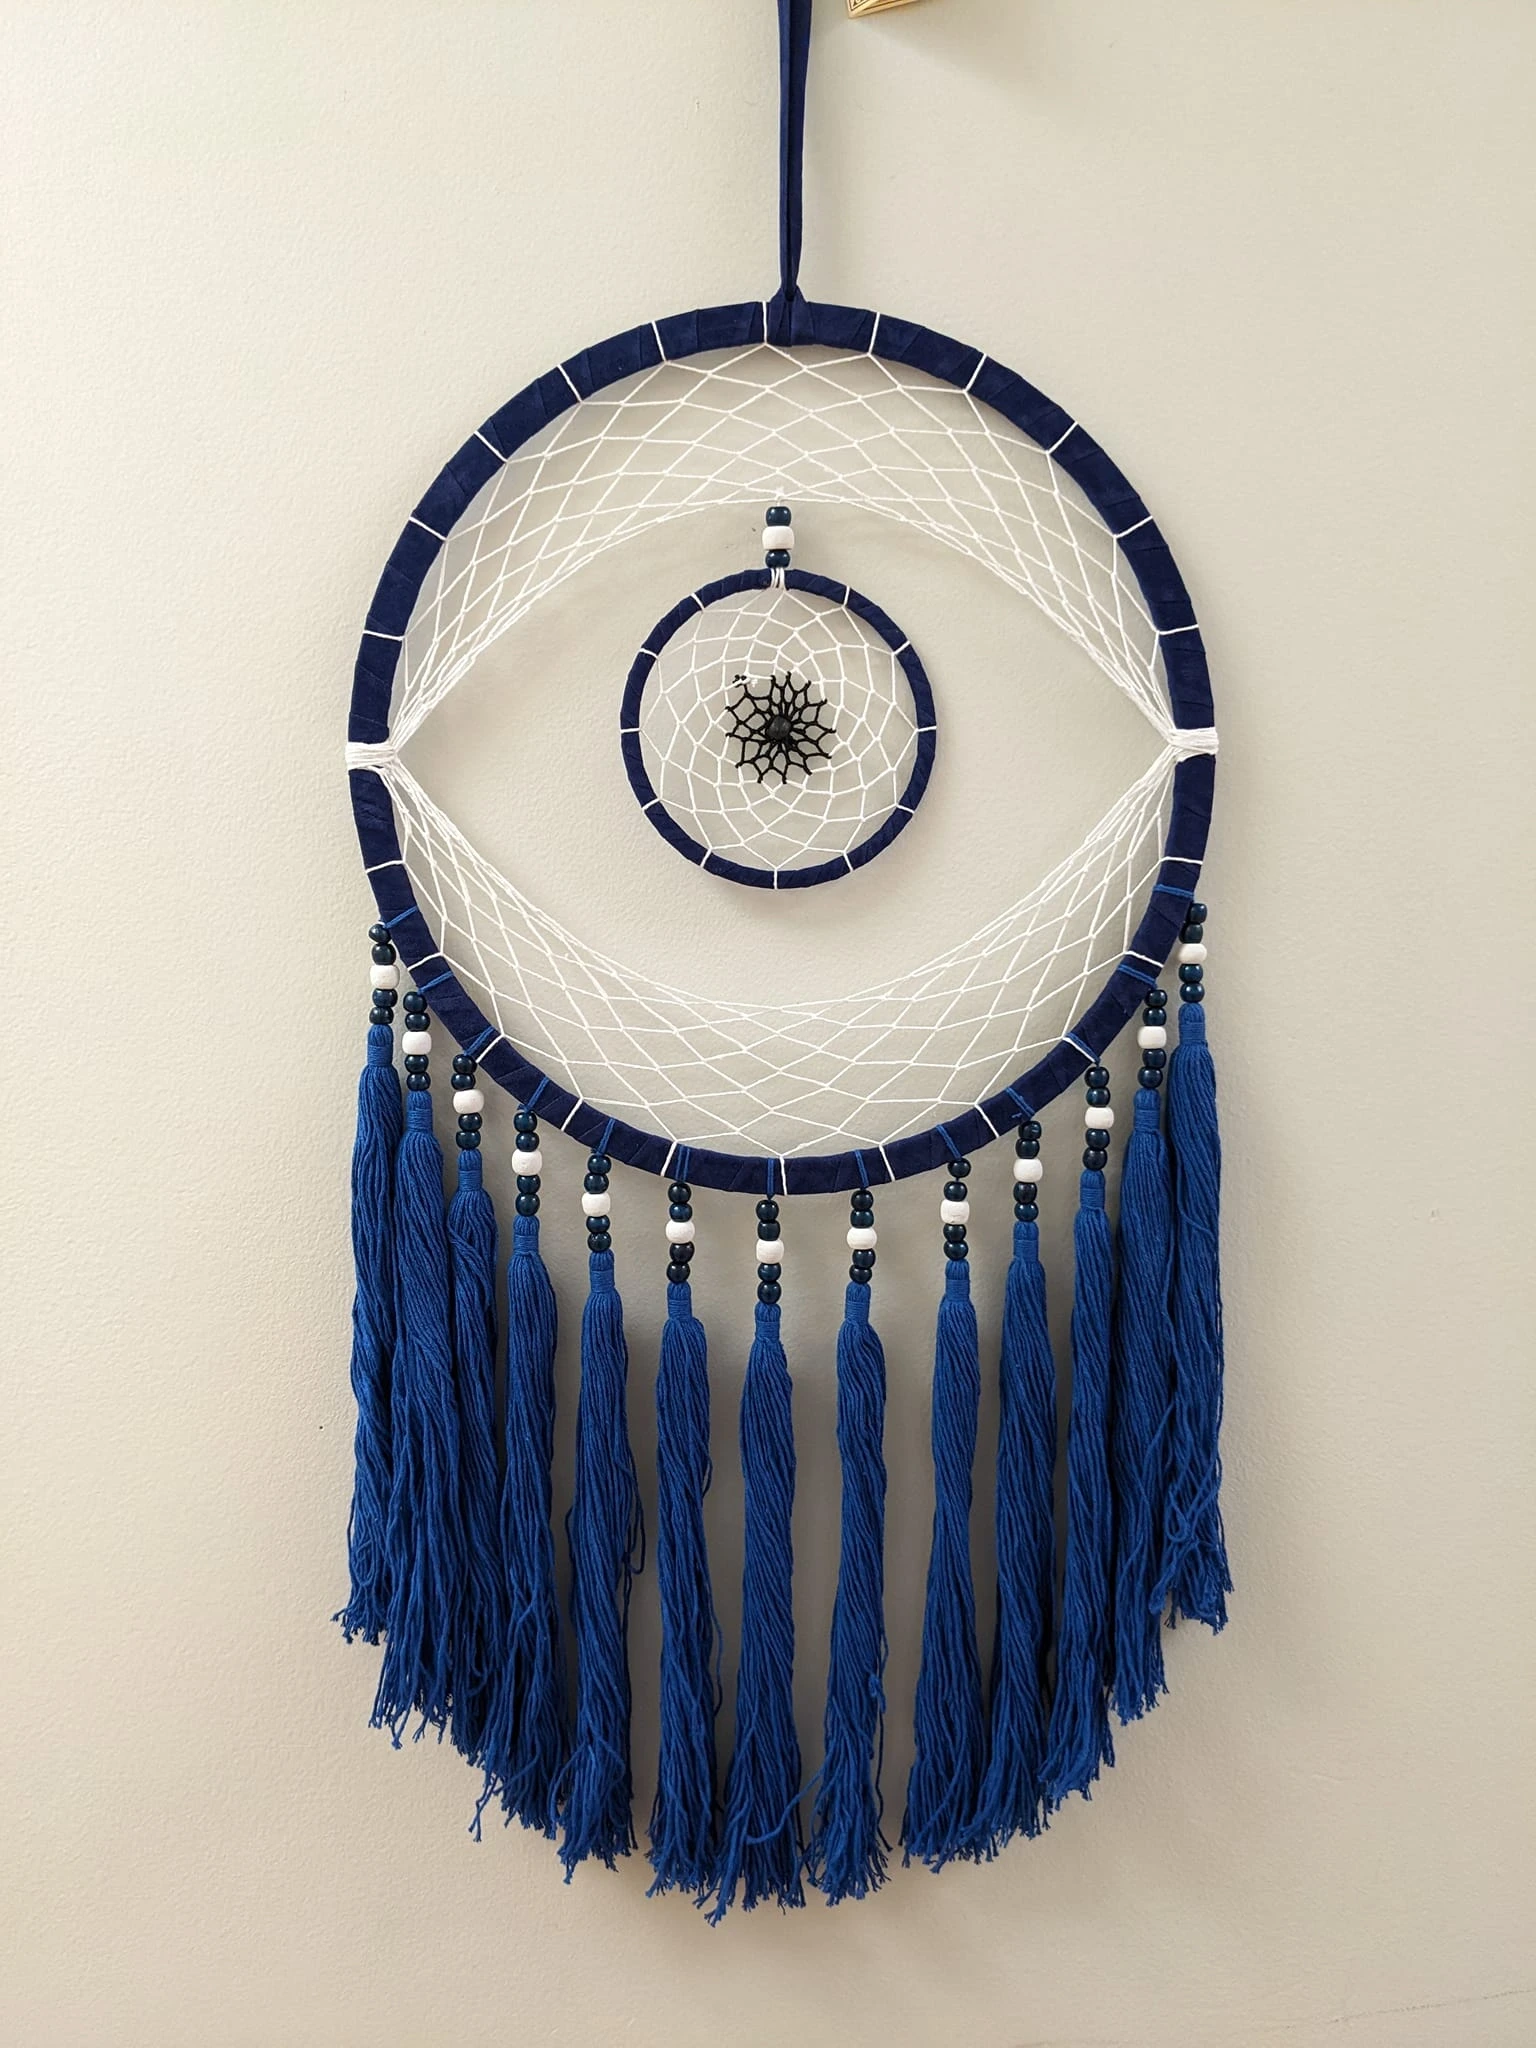 A large dreamcatcher in the shape of an evil eye symbol